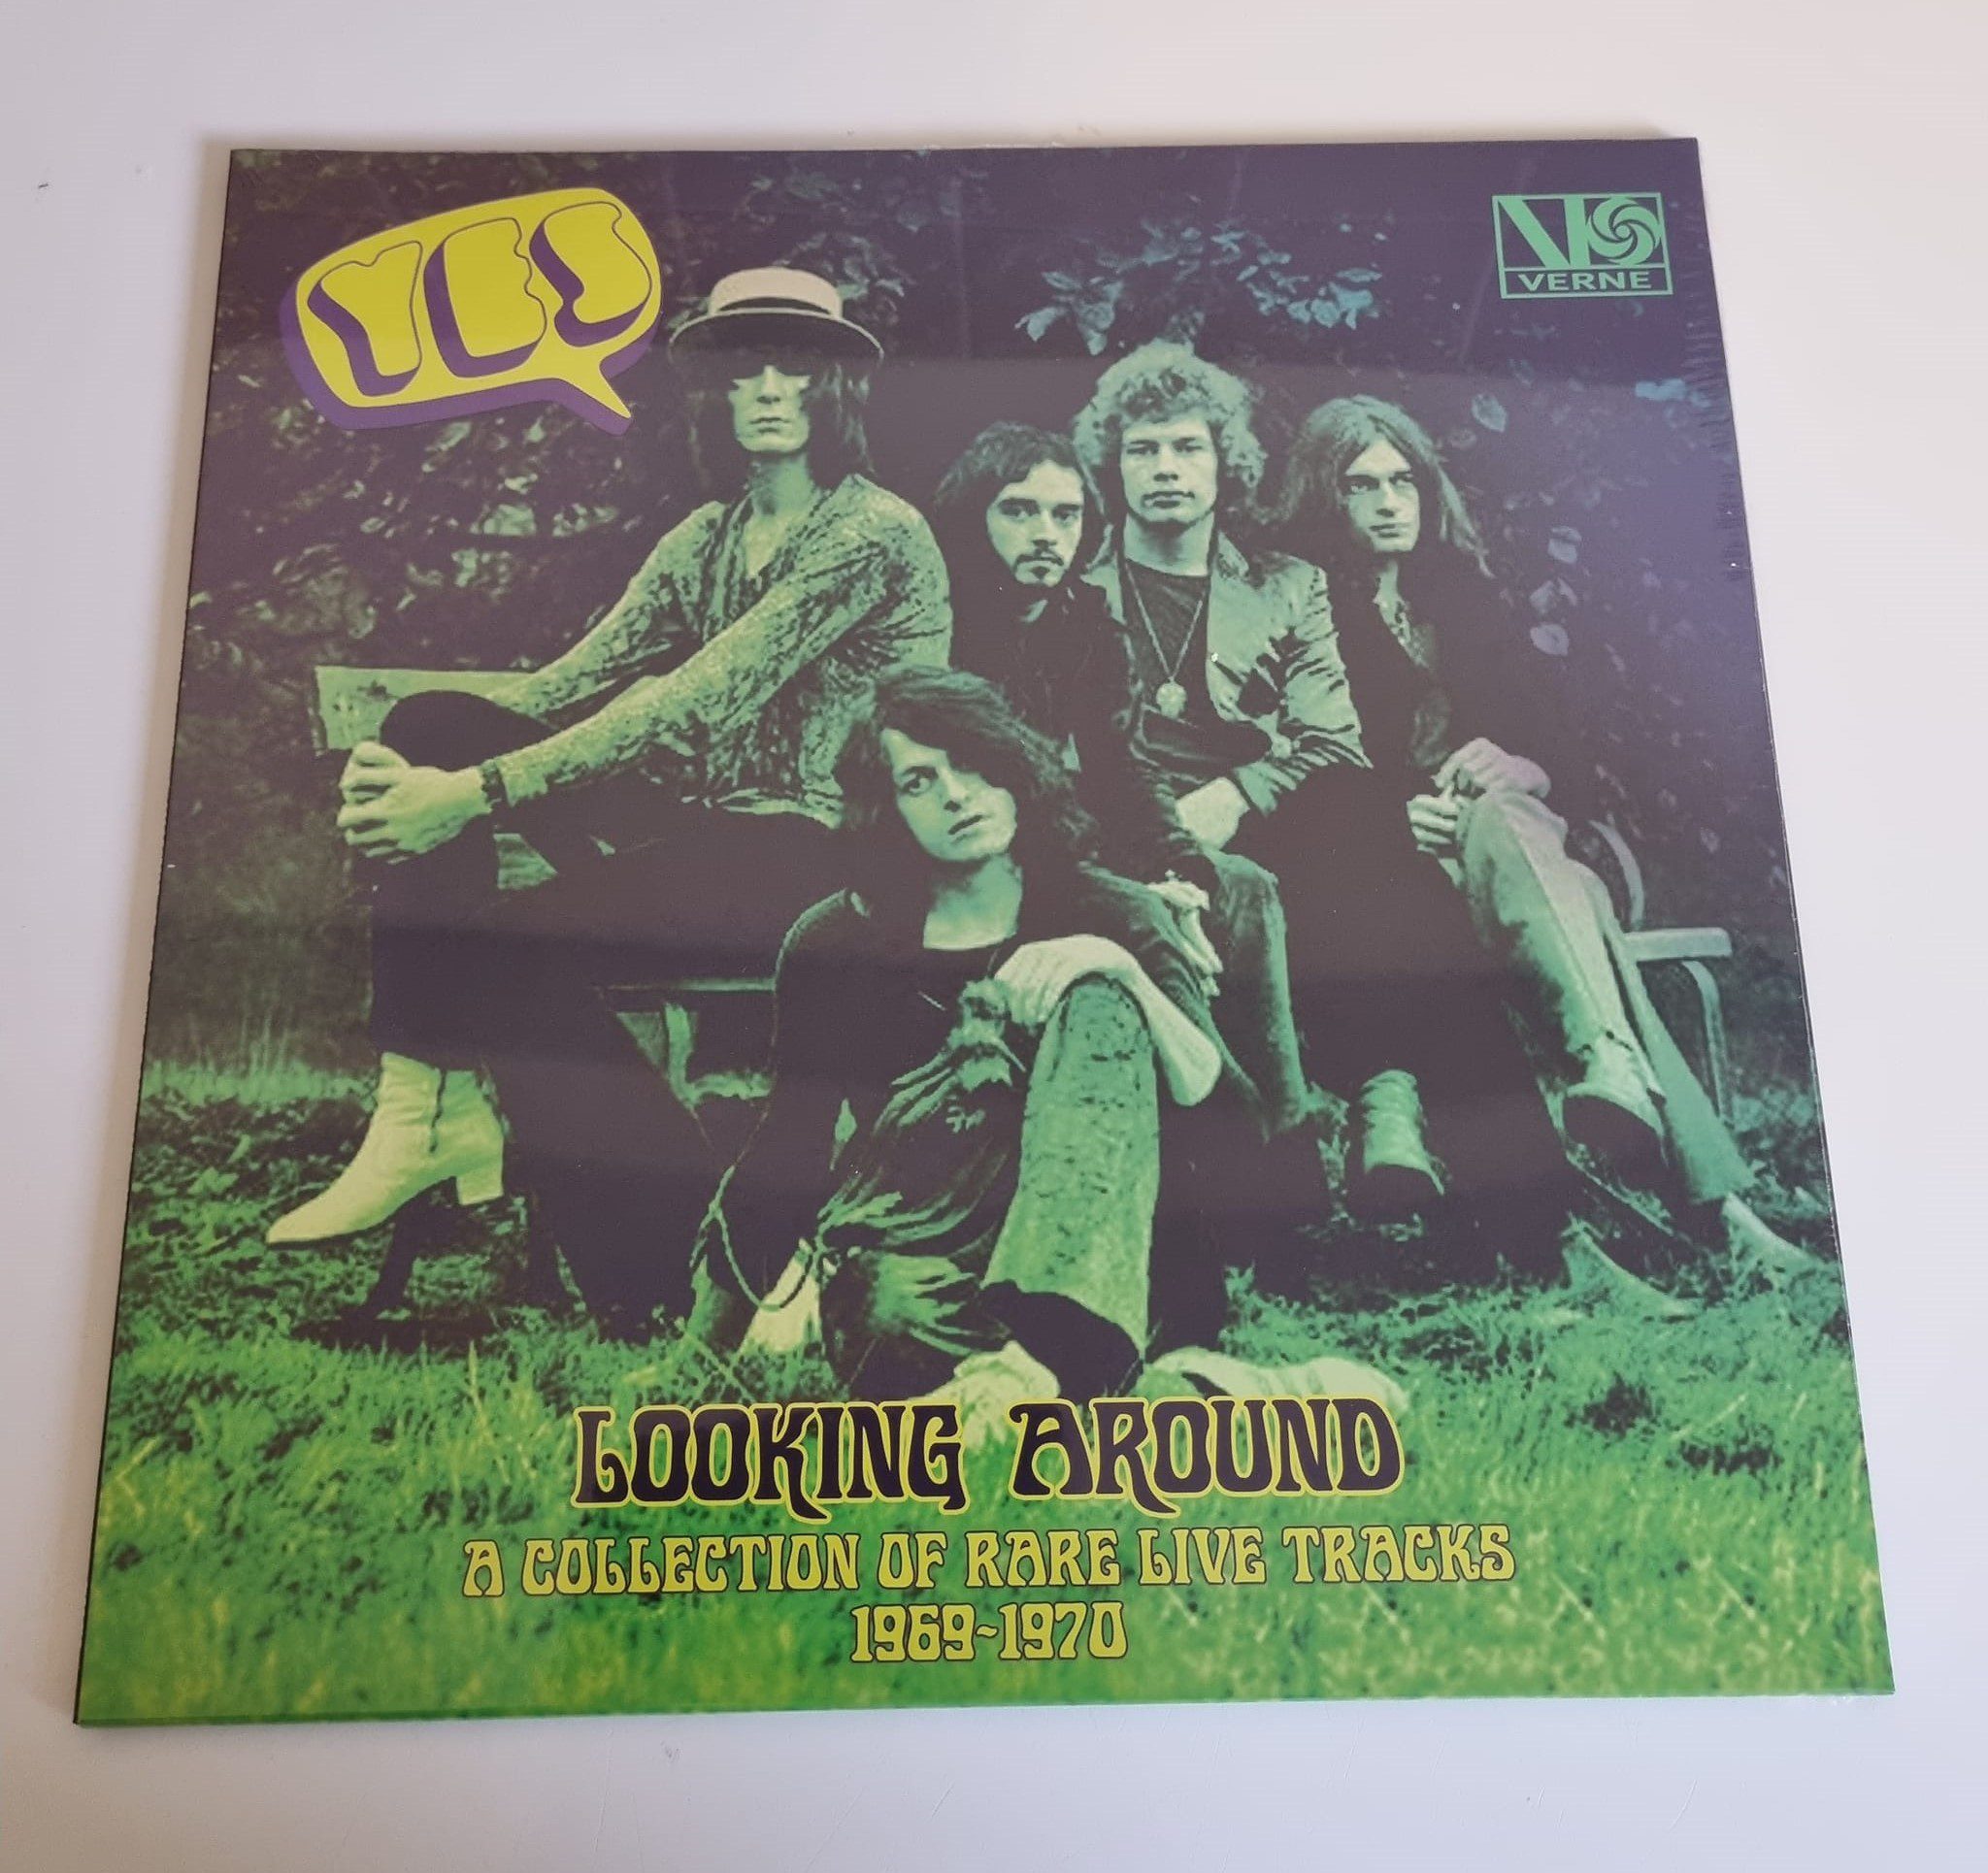 Buy this rare Yes record by clicking here